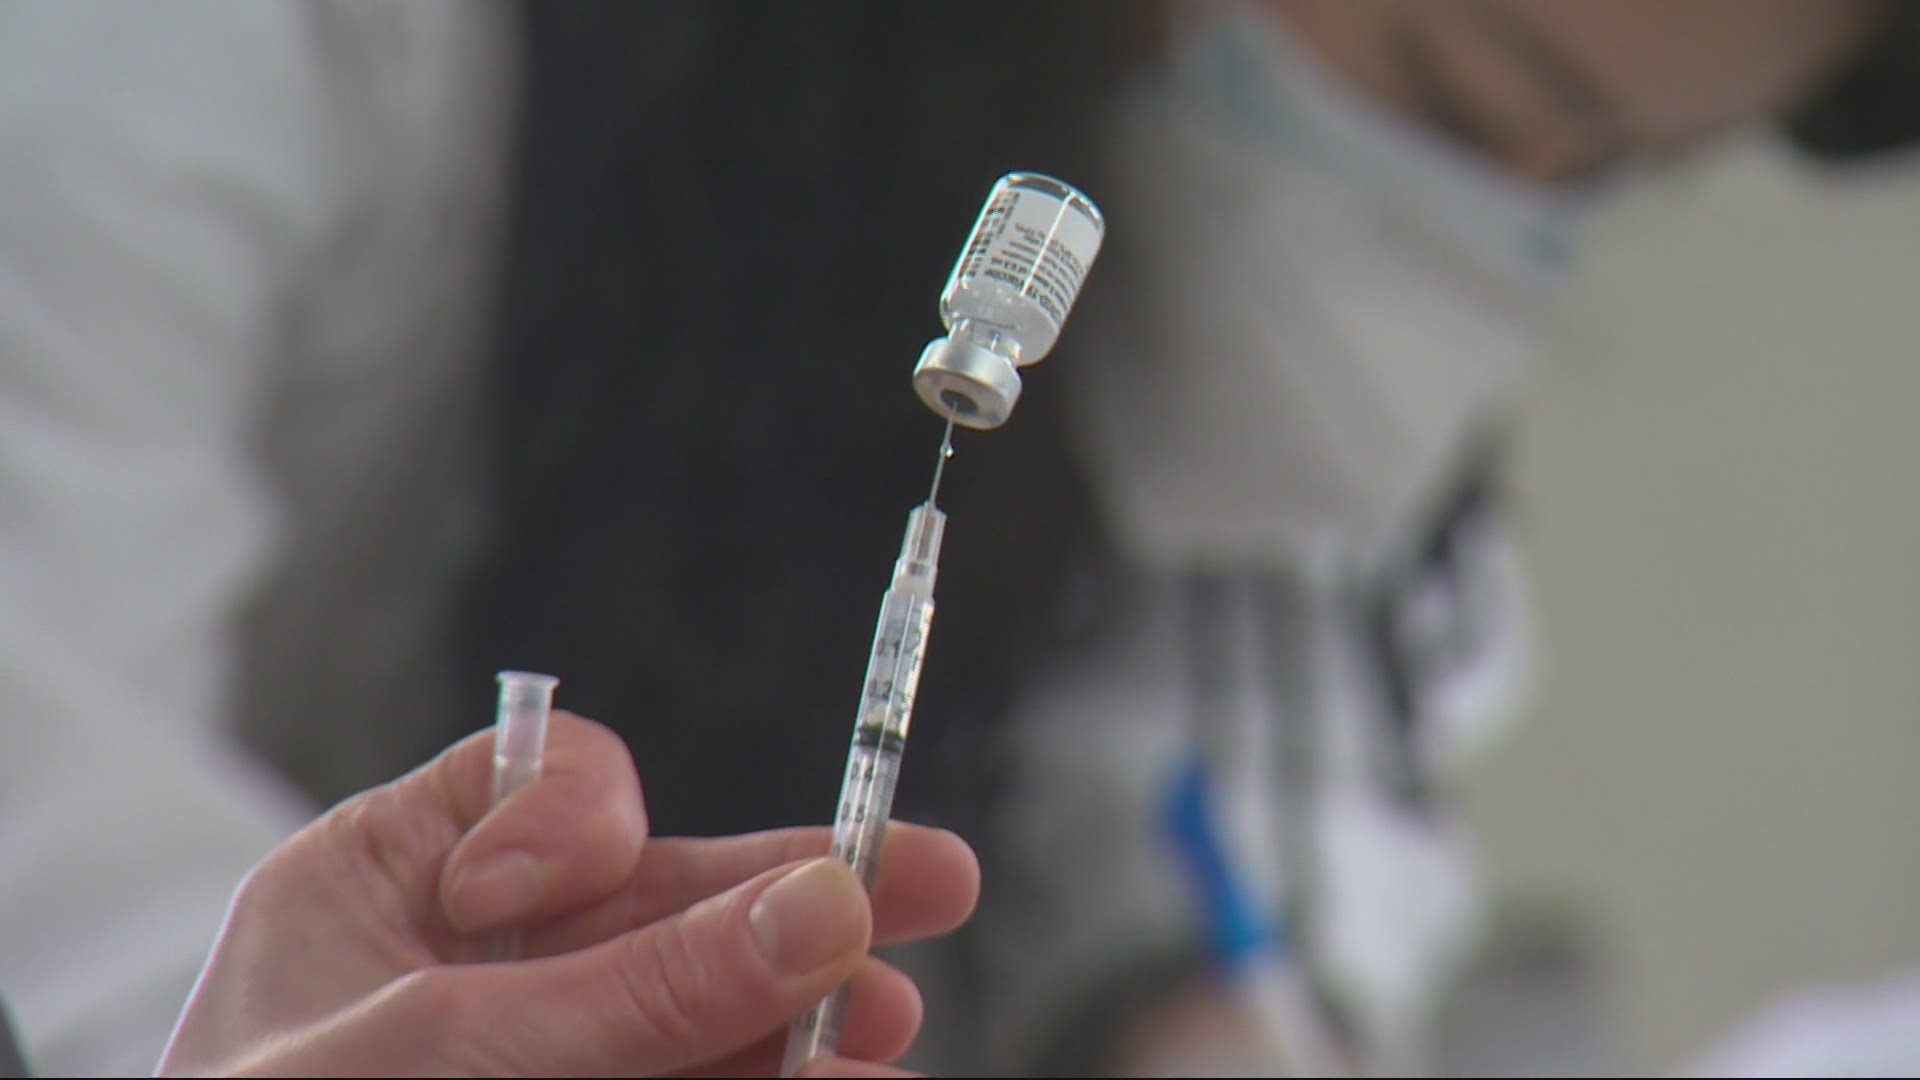 People who live in Southwest Washington have a new place to get a COVID shot. As Tim Gordon reports, Clark County announced a new vaccination site.